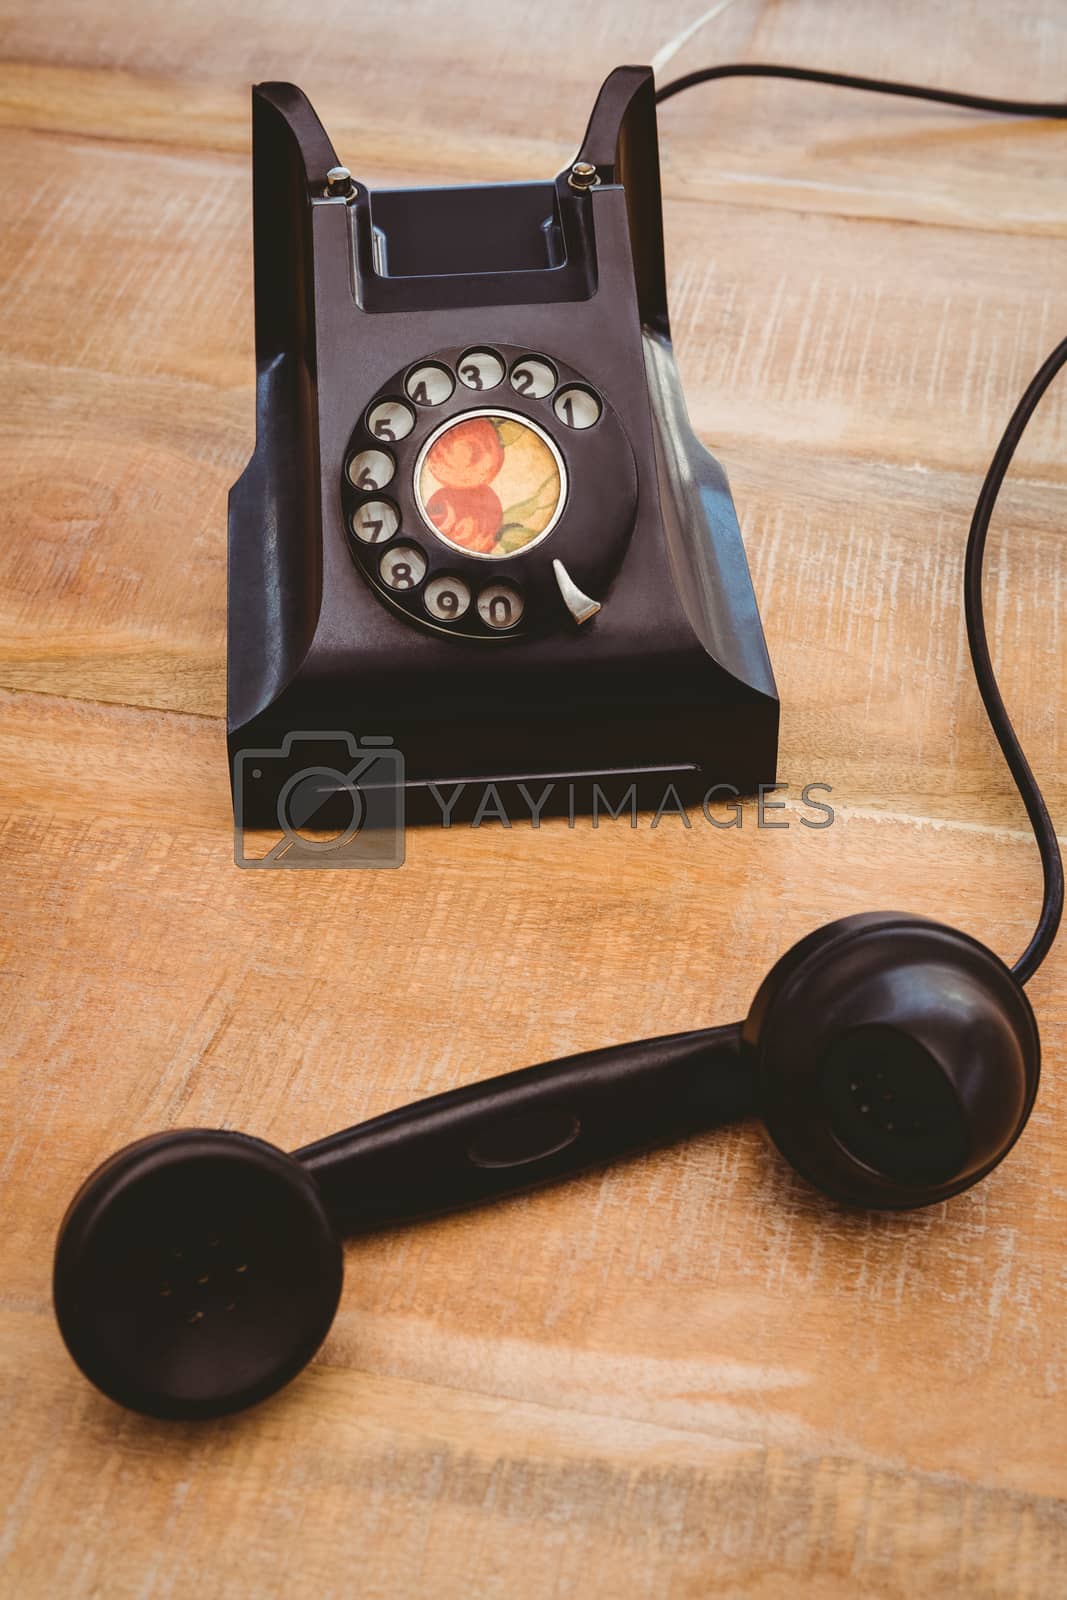 Royalty free image of View of an old phone by Wavebreakmedia